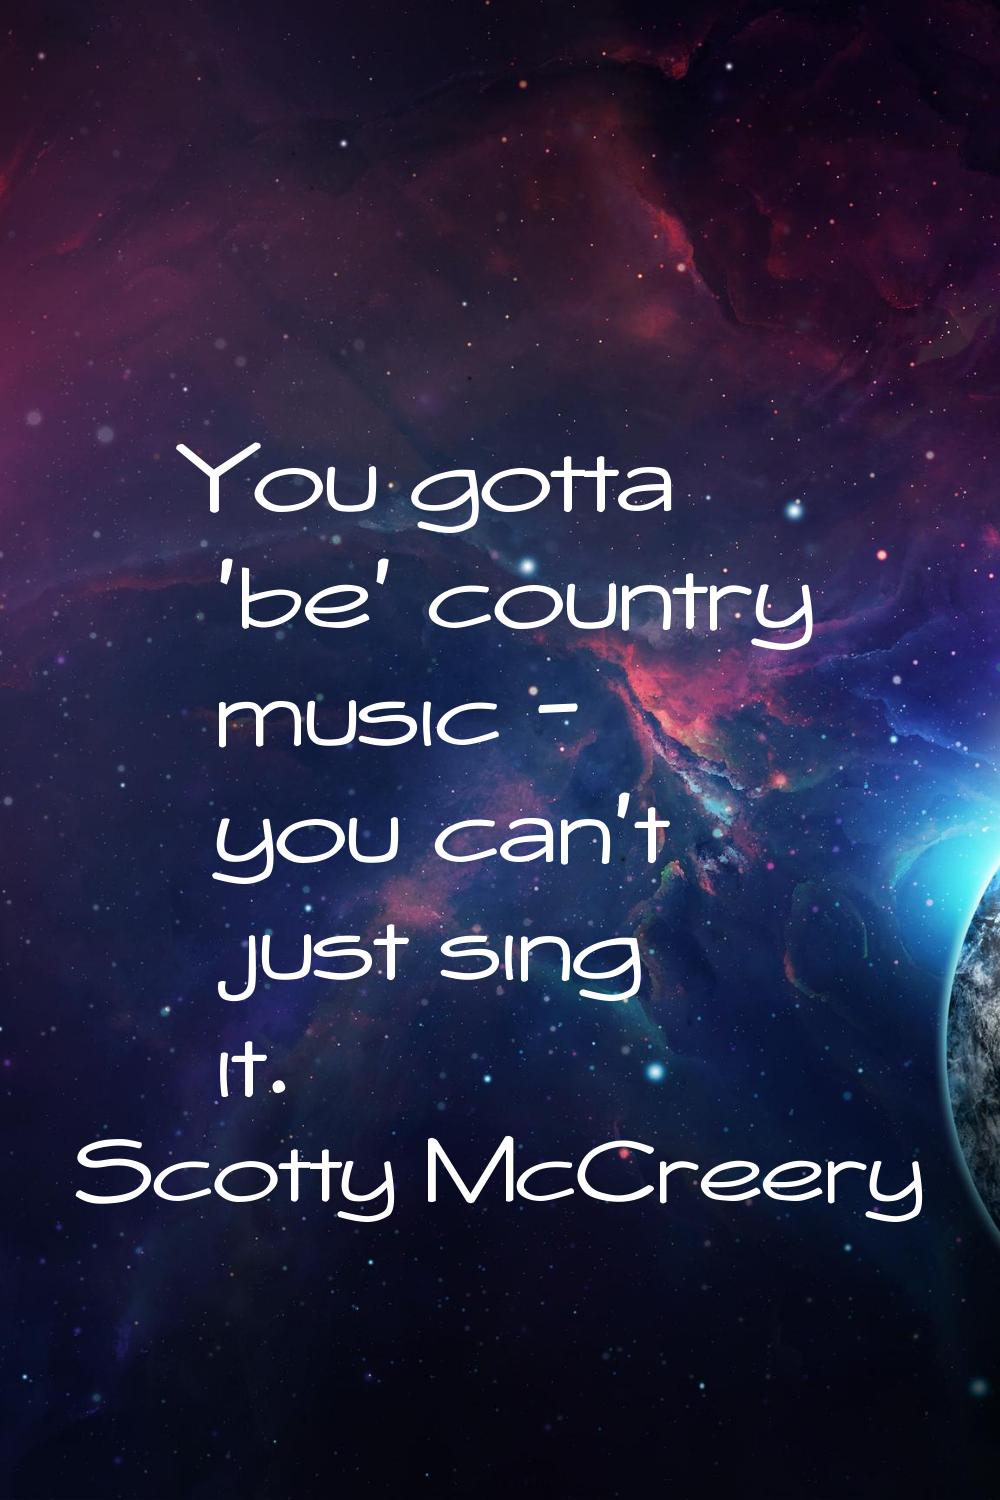 You gotta 'be' country music - you can't just sing it.